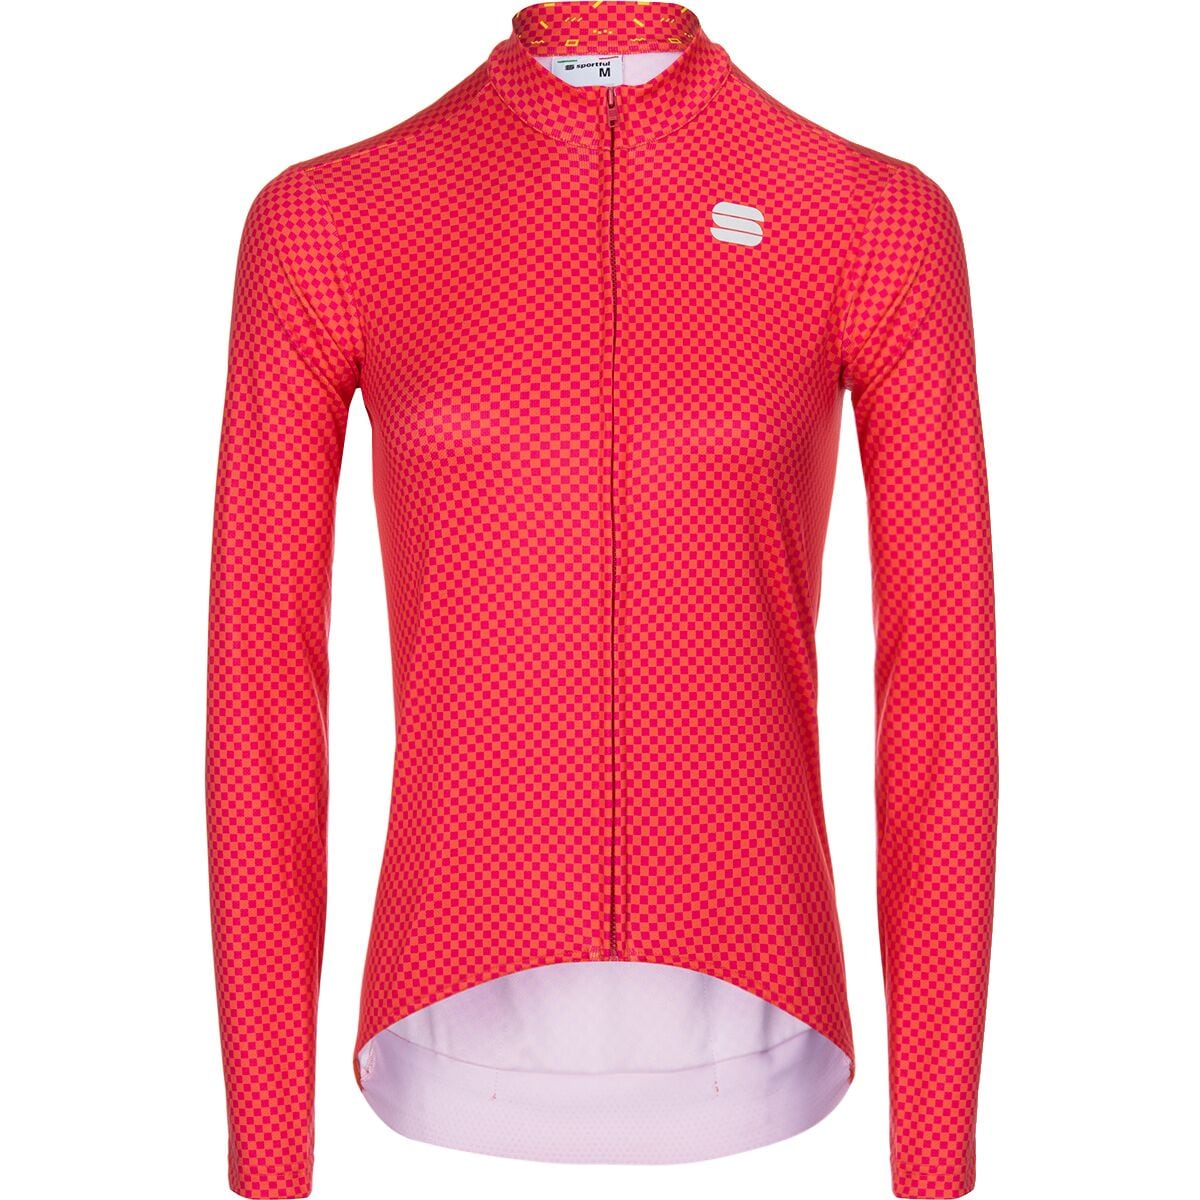 Checkmate Thermal Jersey Sportful